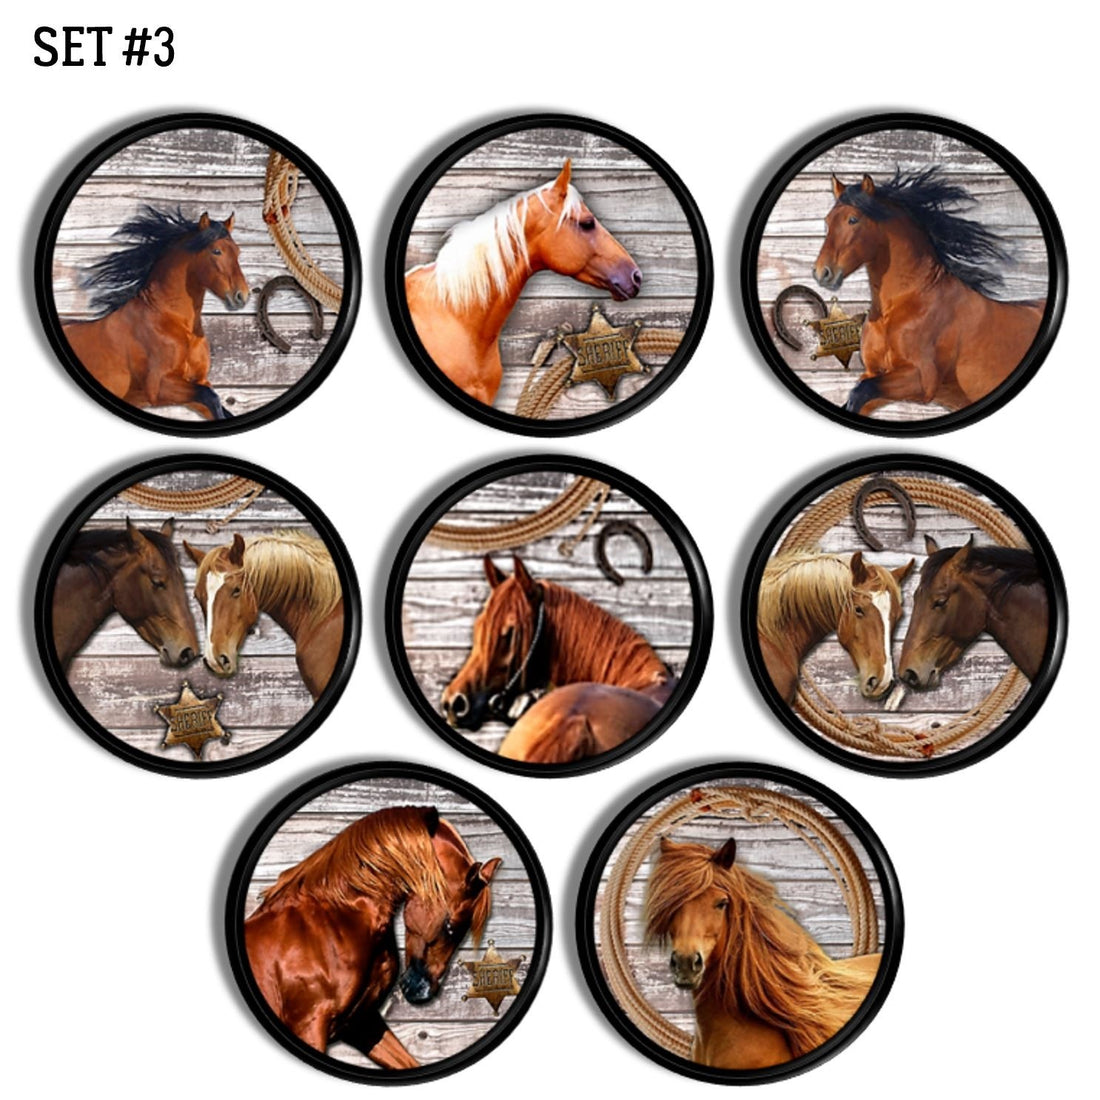 Set of 8 handmade horse theme furniture drawer knobs. Southwestern country ranch decor cupboard drawer pulls.